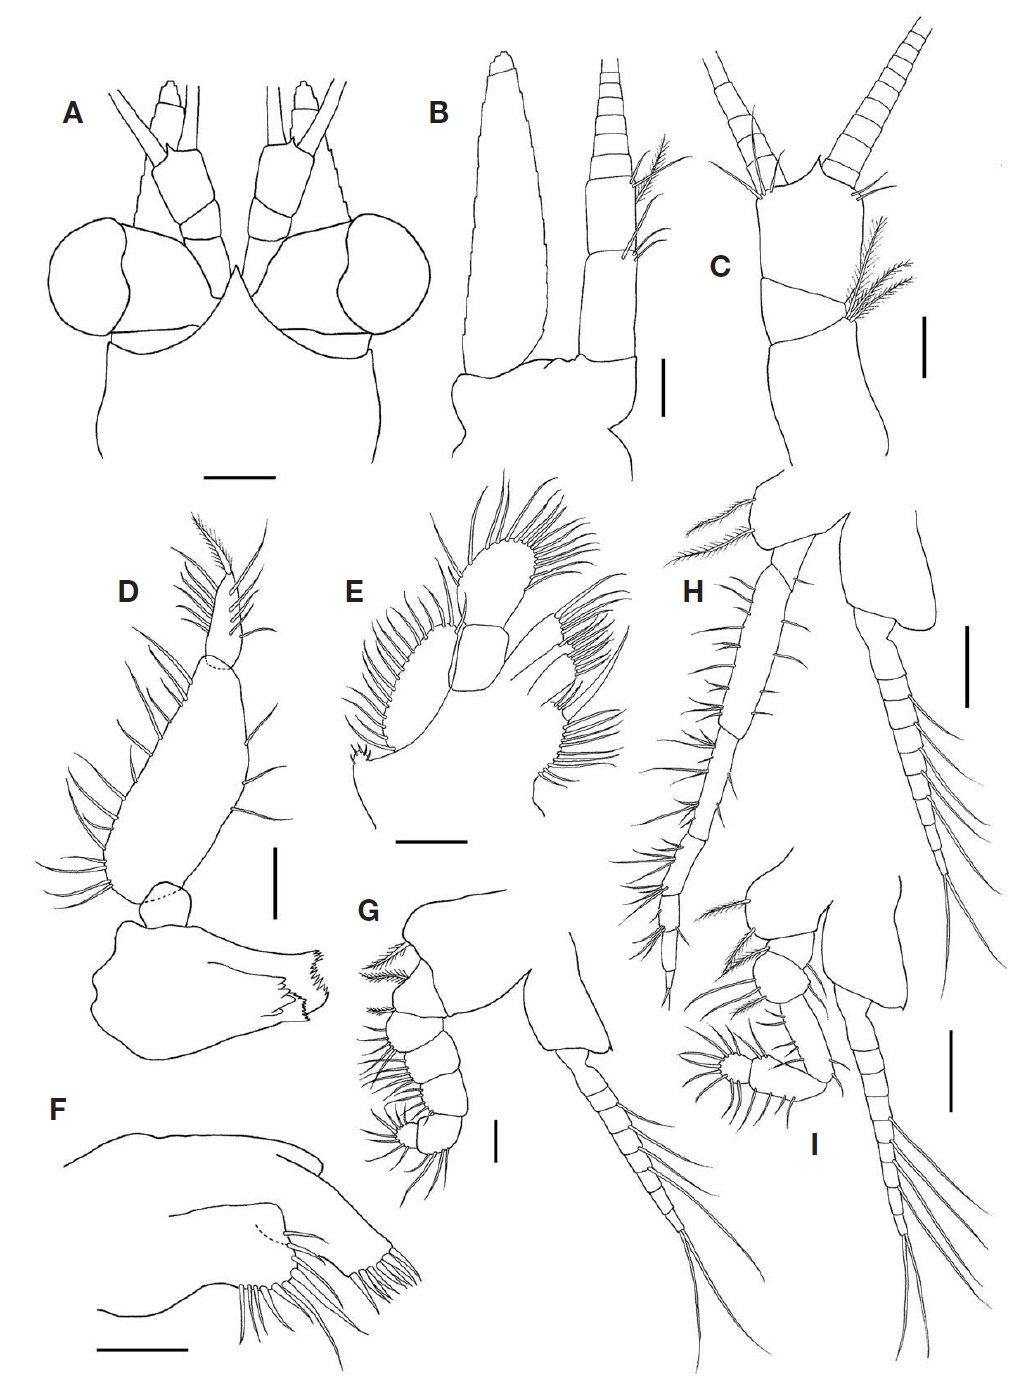 Nipponomysis fusca (Ii, 1936), female. A, Anterior part of carapace and cephalic appendages; B, Antenna; C, Antennule; D, Mandible; E, Maxilla; F, Maxillule; G, First thoracopod; H, Fourth thoracopod; I, Second thoracopod. Scale bars: A, H, I=0.2 mm, B-G=0.1 mm.